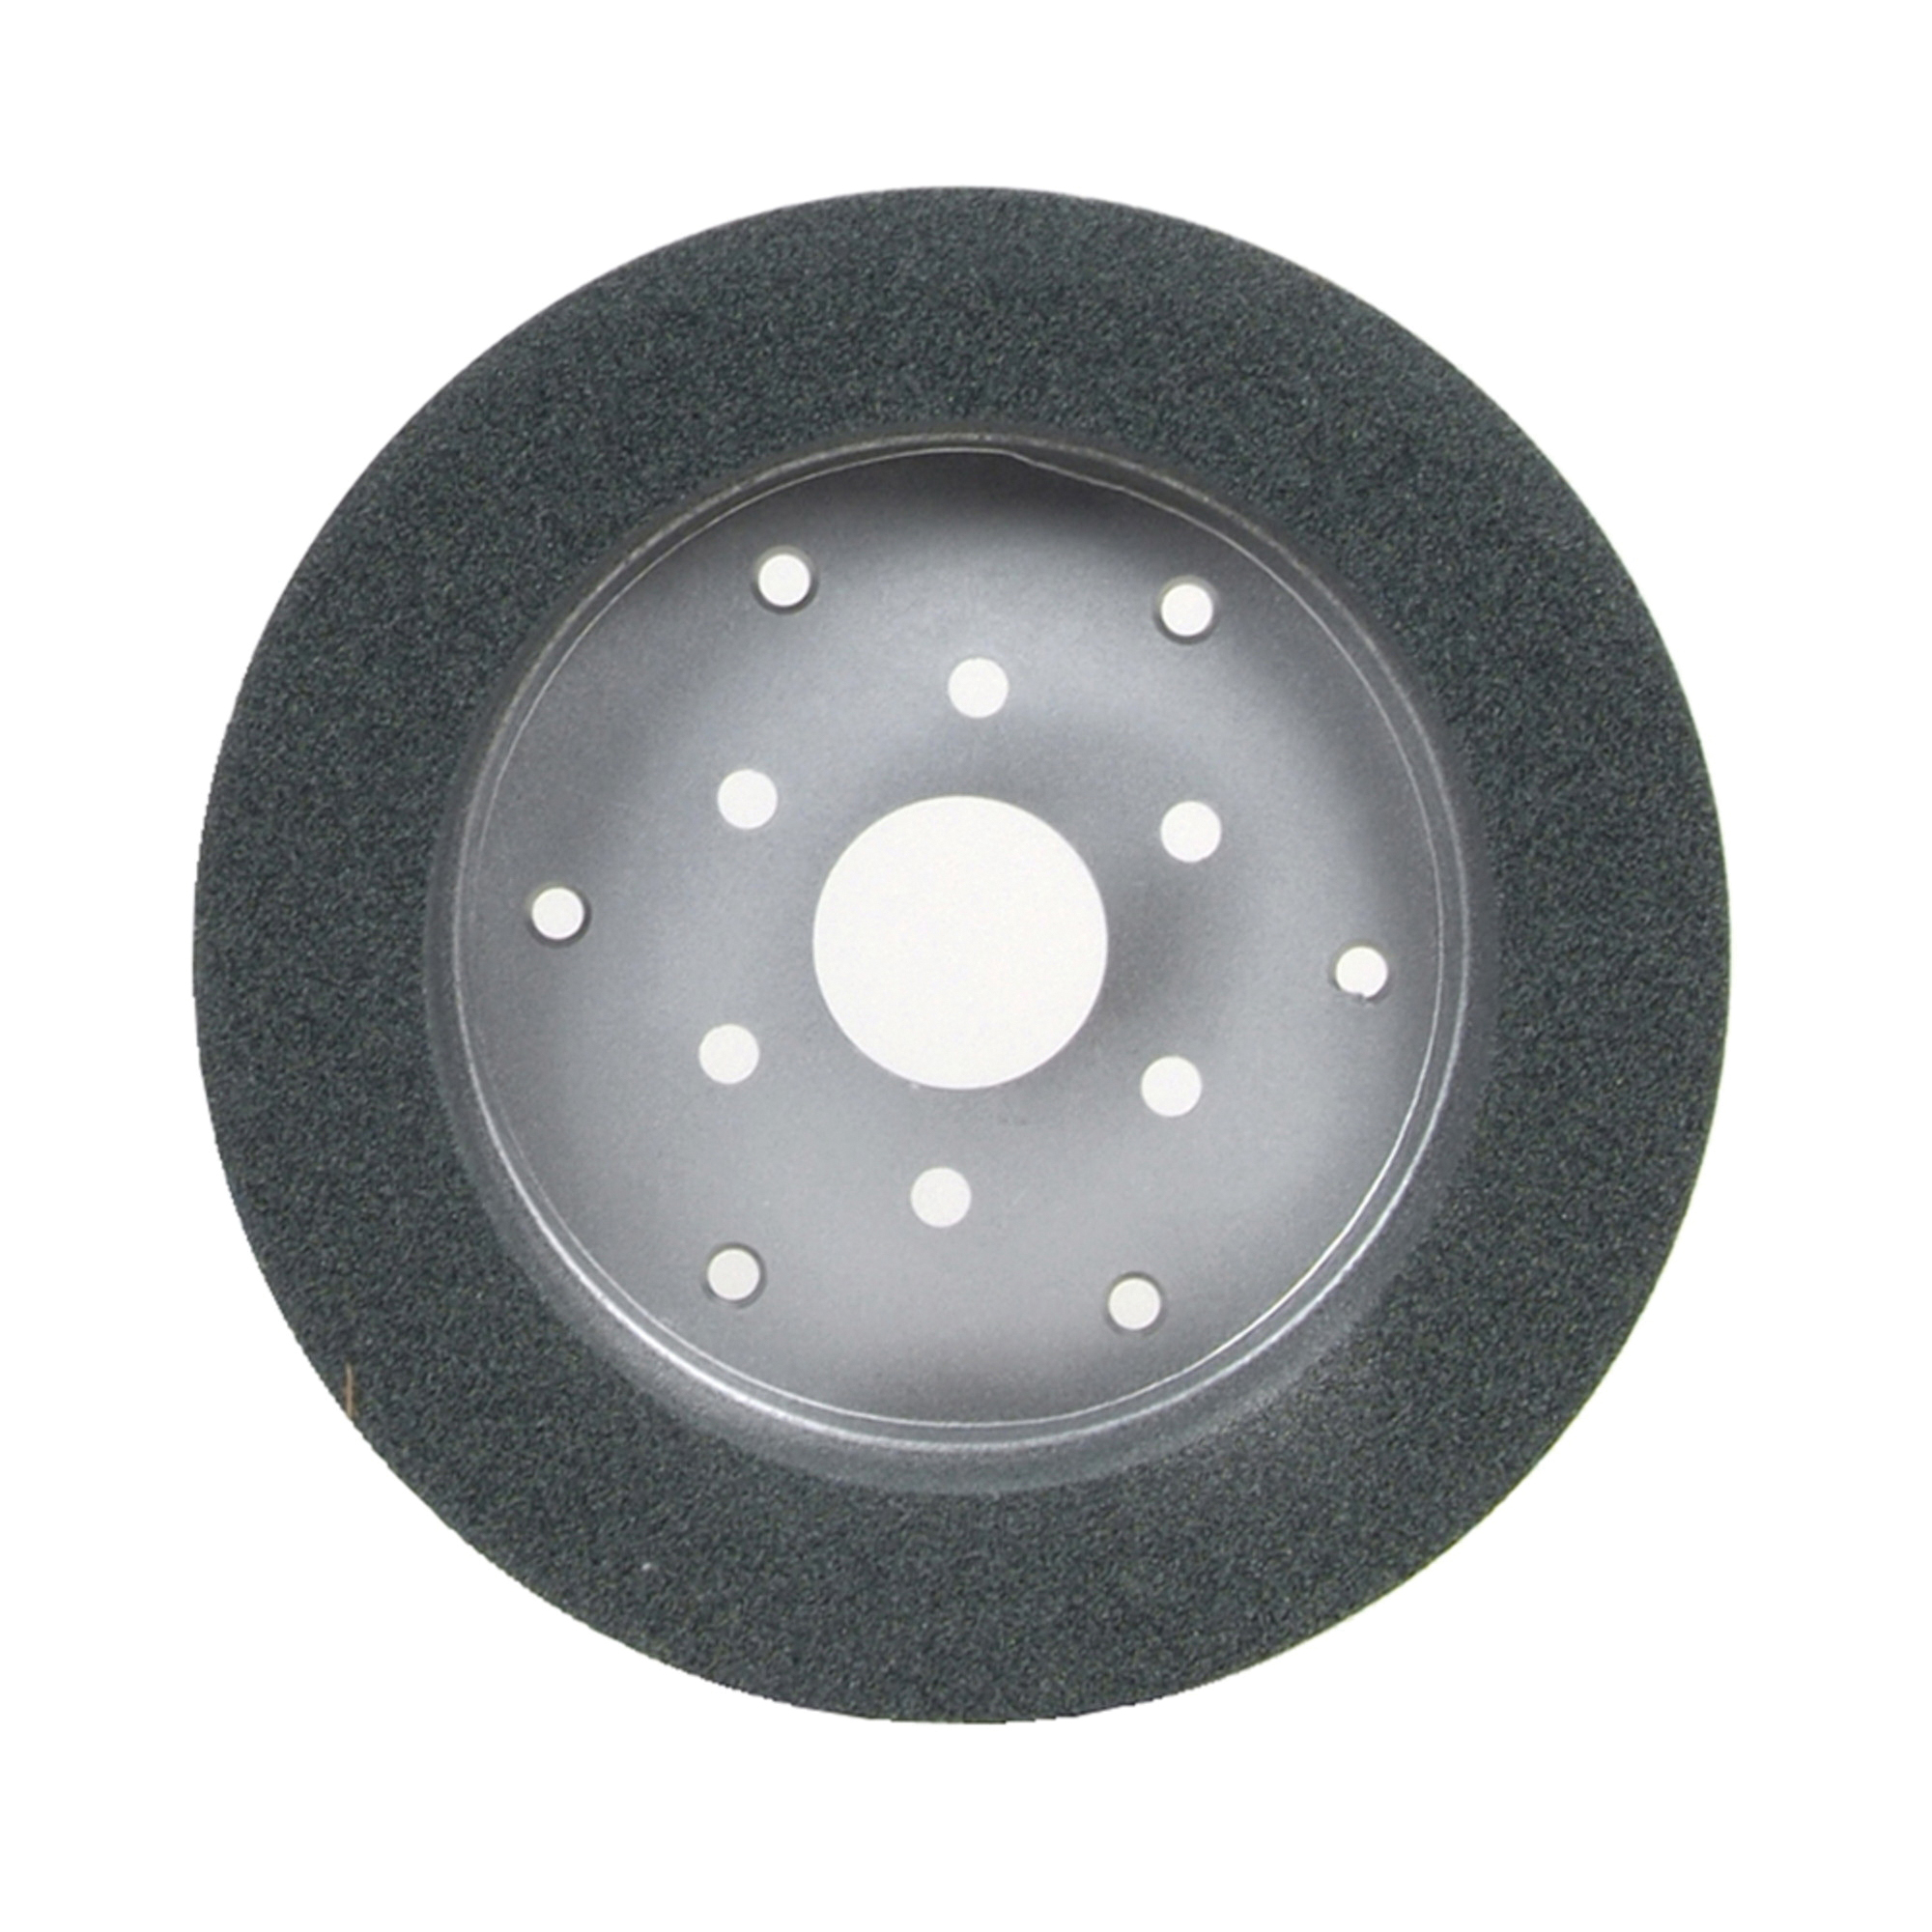 Norton® 66253161675 39C Cylinder Toolroom Wheel, 10 in Dia x 2 in THK, 7 in Center Hole, 60 Grit, Silicon Carbide Abrasive